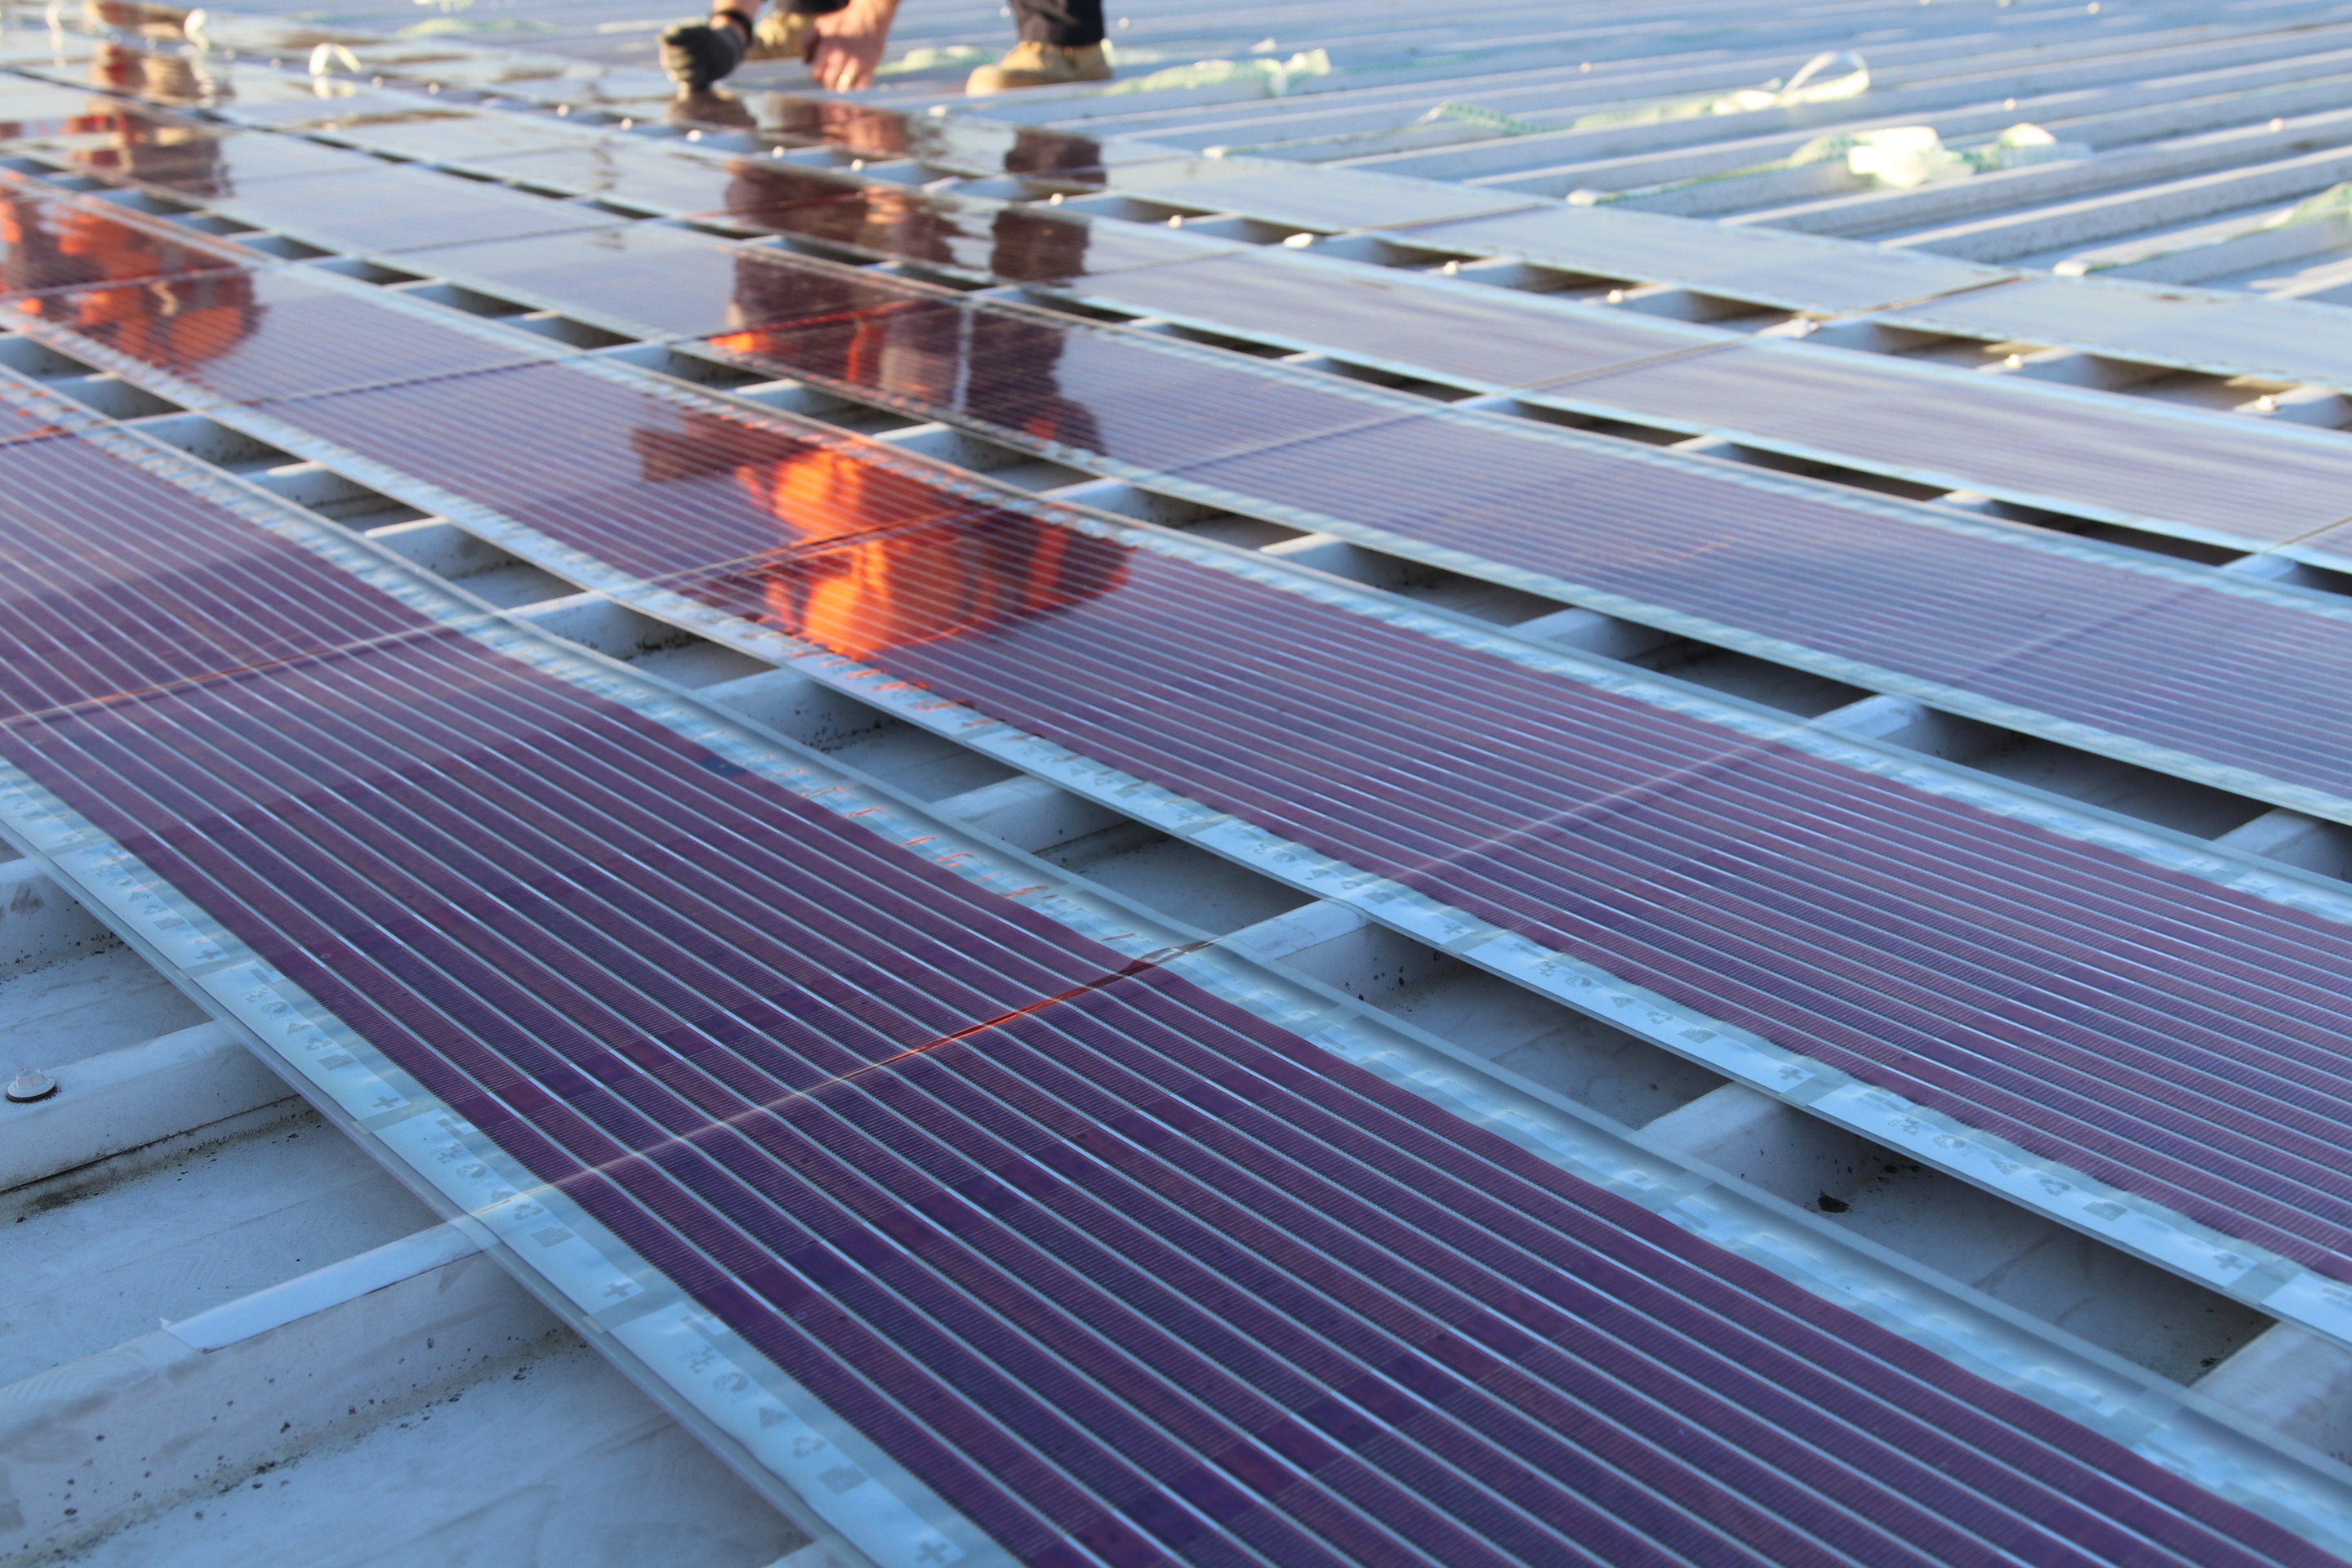 New solar cells offer you the chance to print out solar panels and